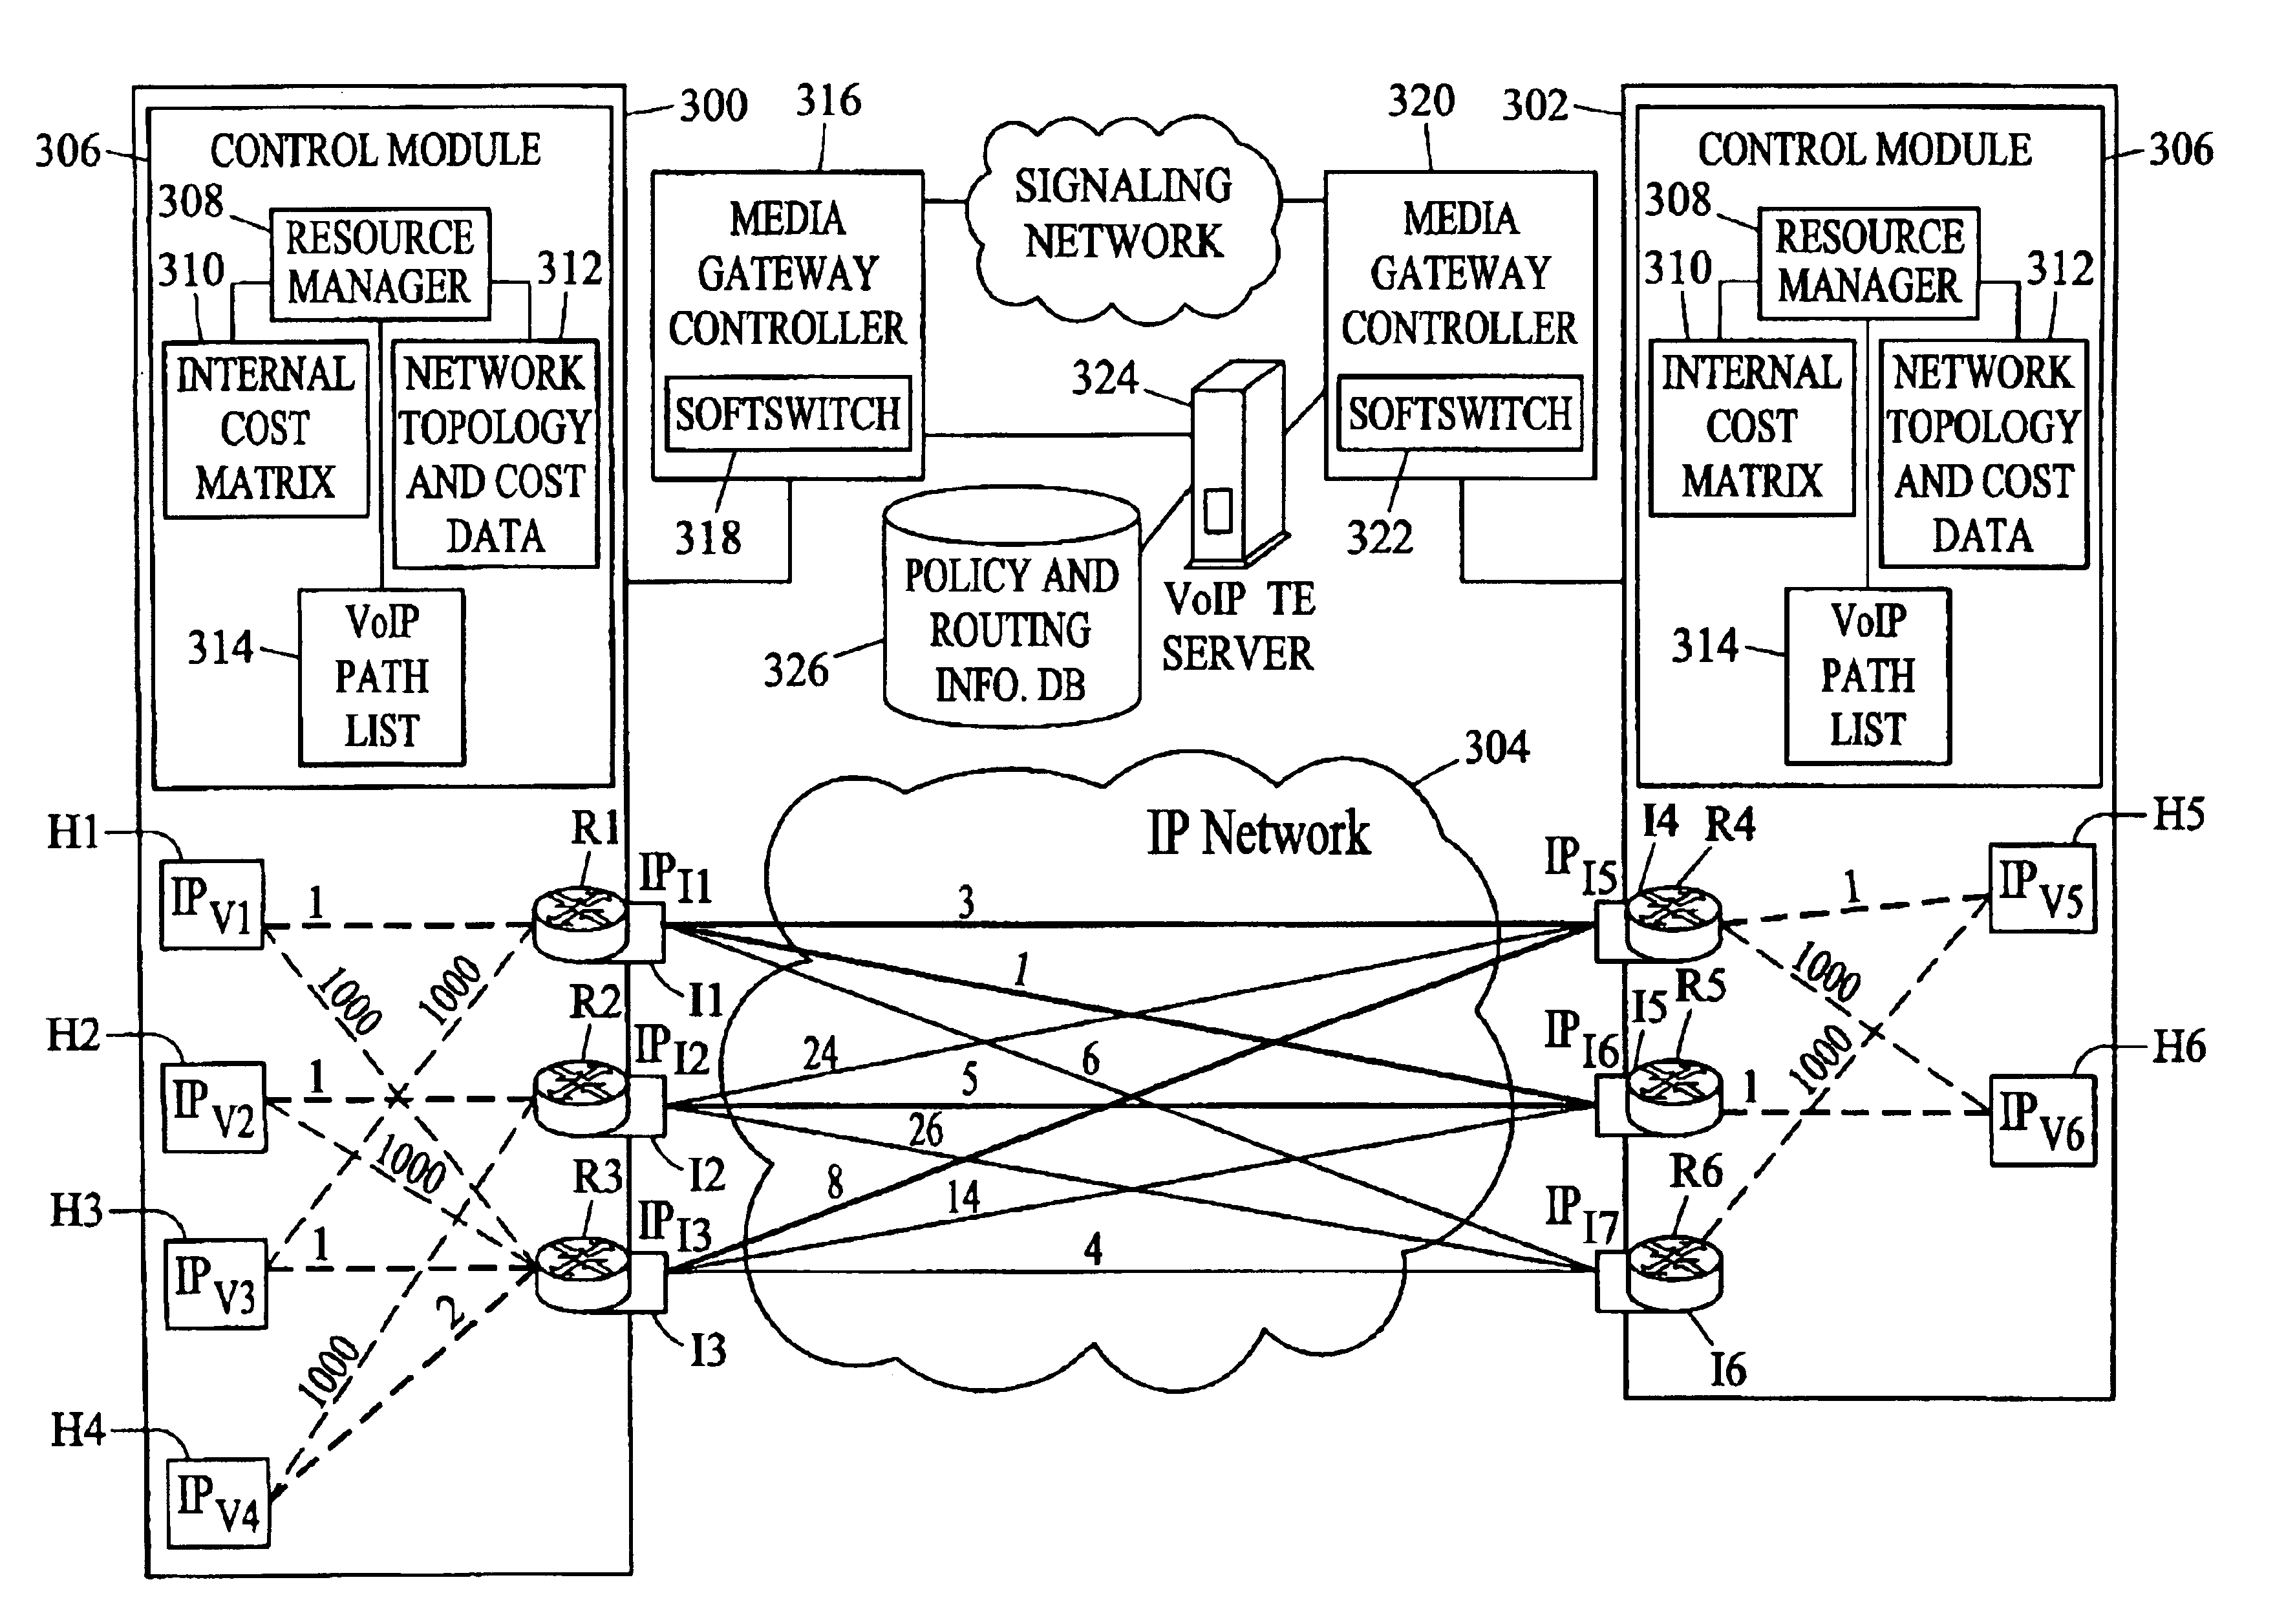 Methods, systems, and computer program products for voice over IP (VoIP) traffic engineering and path resilience using network-aware media gateway